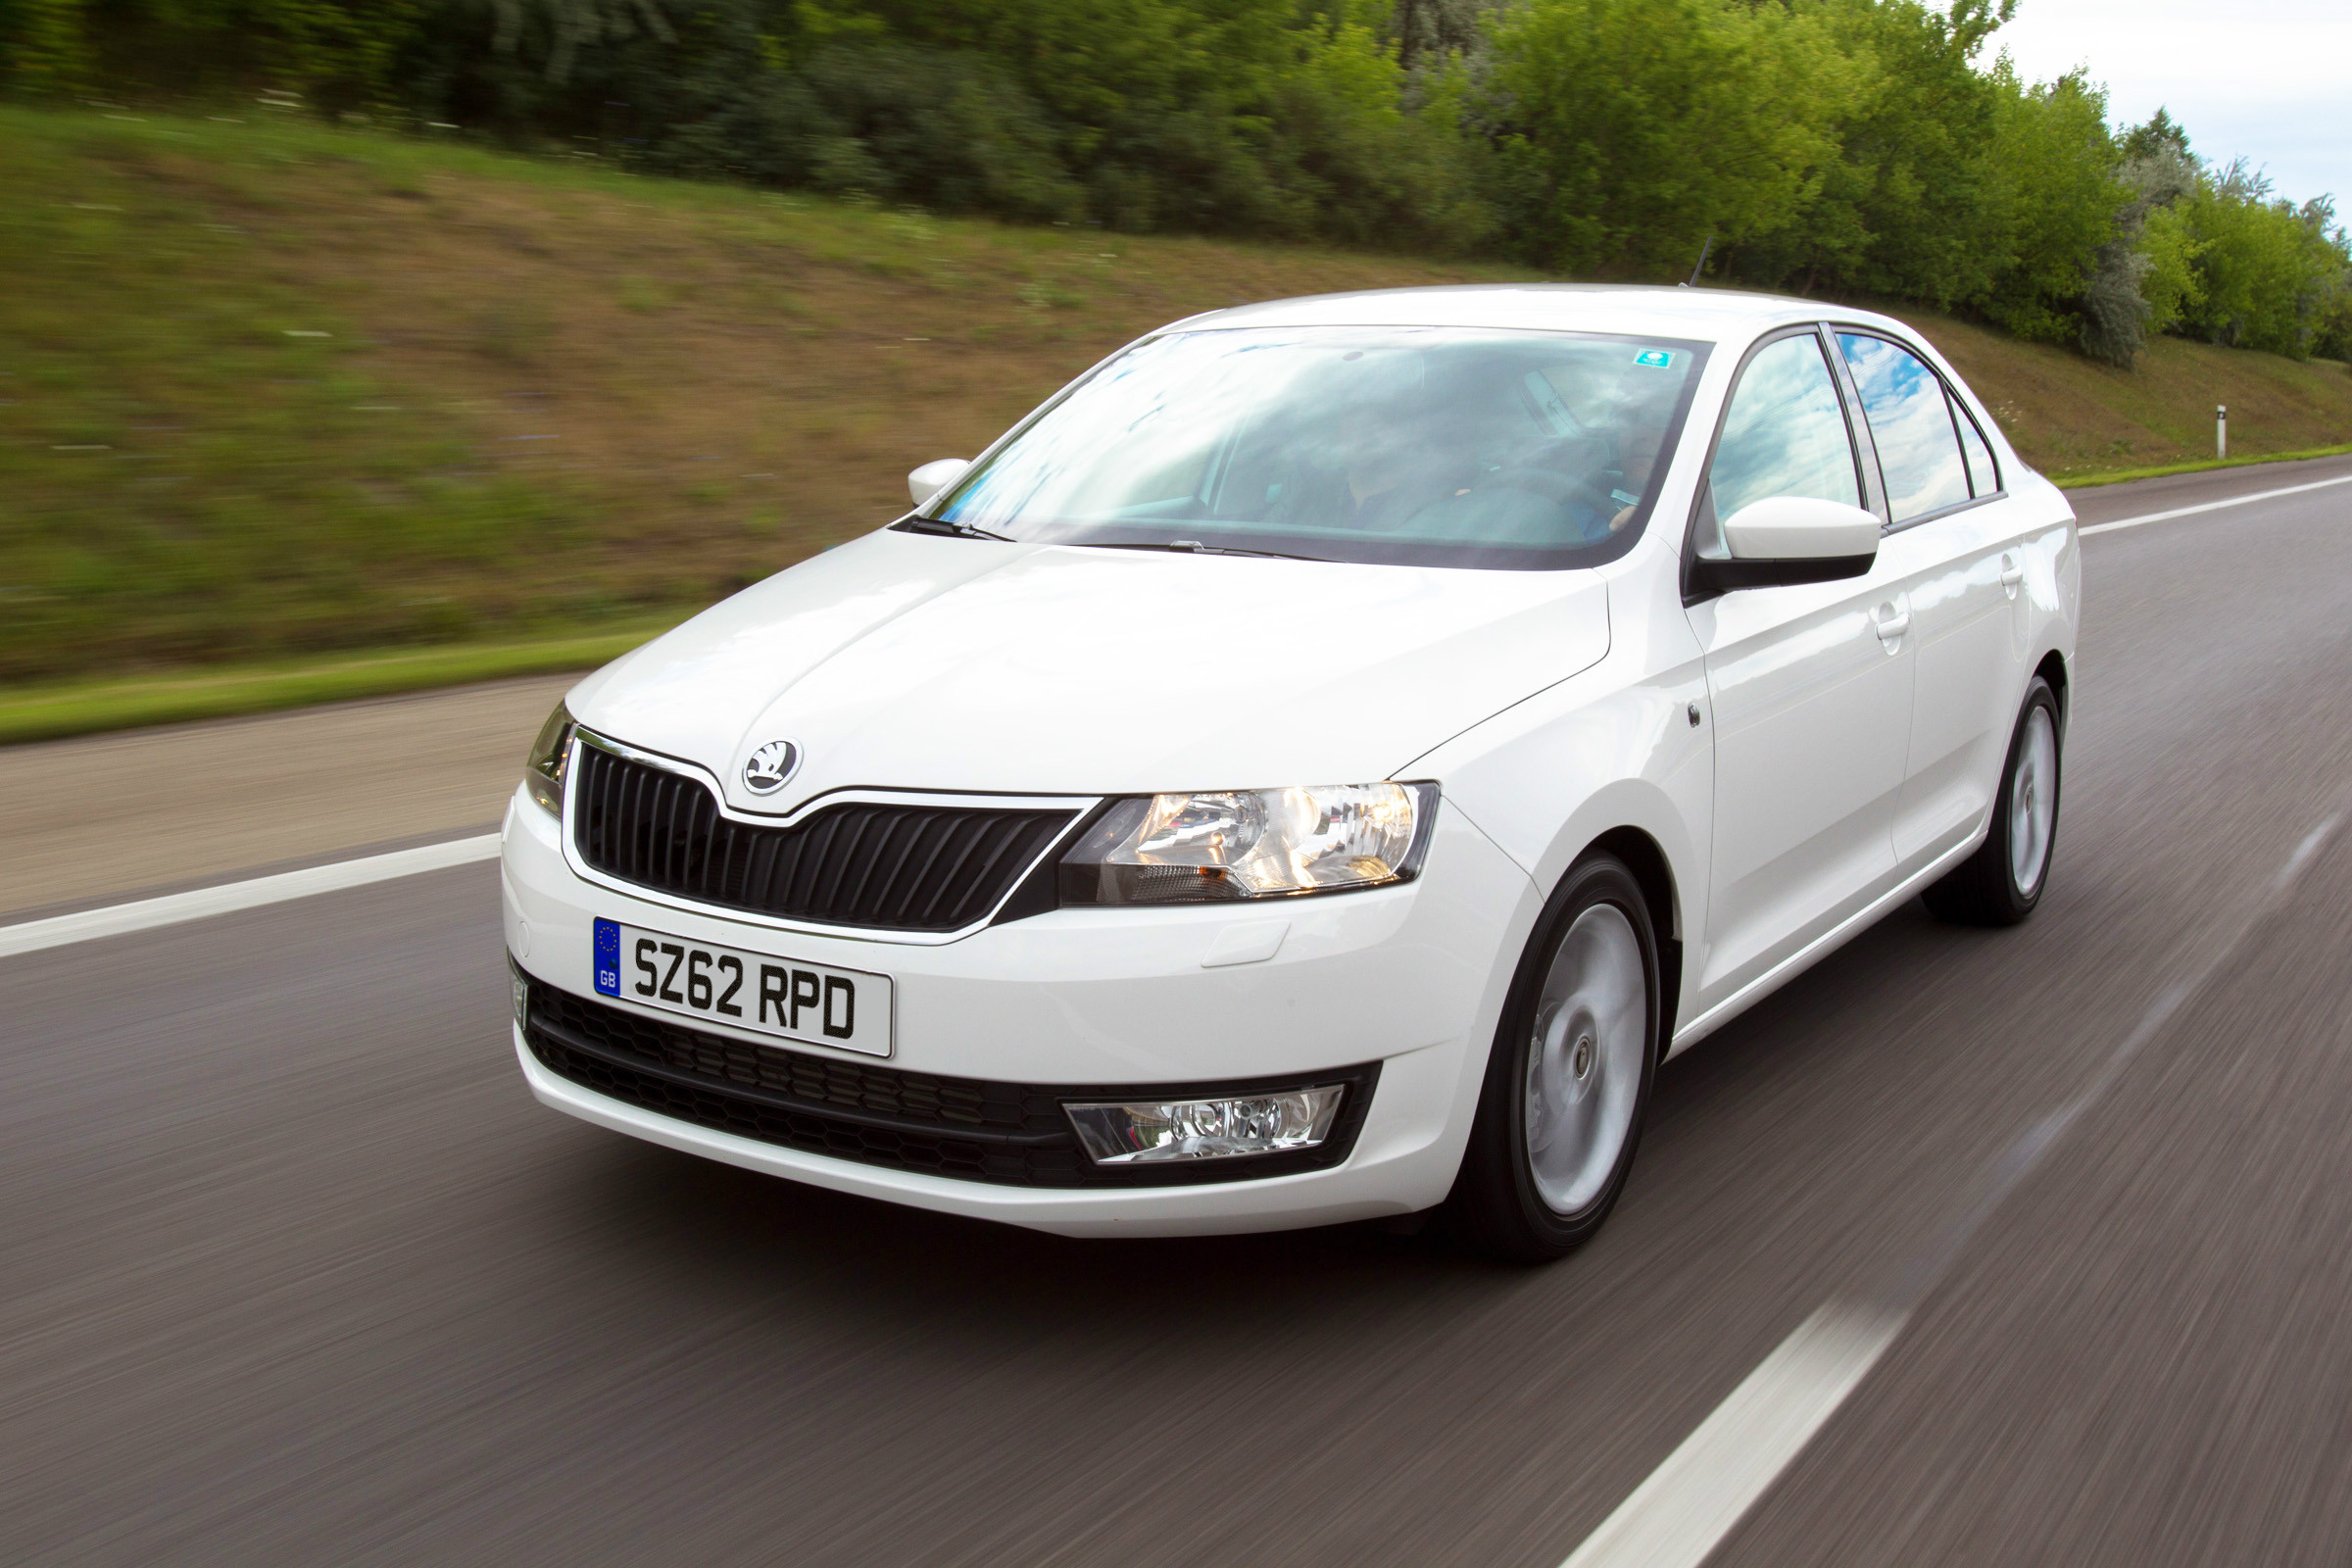 Skoda Rapid has the largest boot of any family hatchback